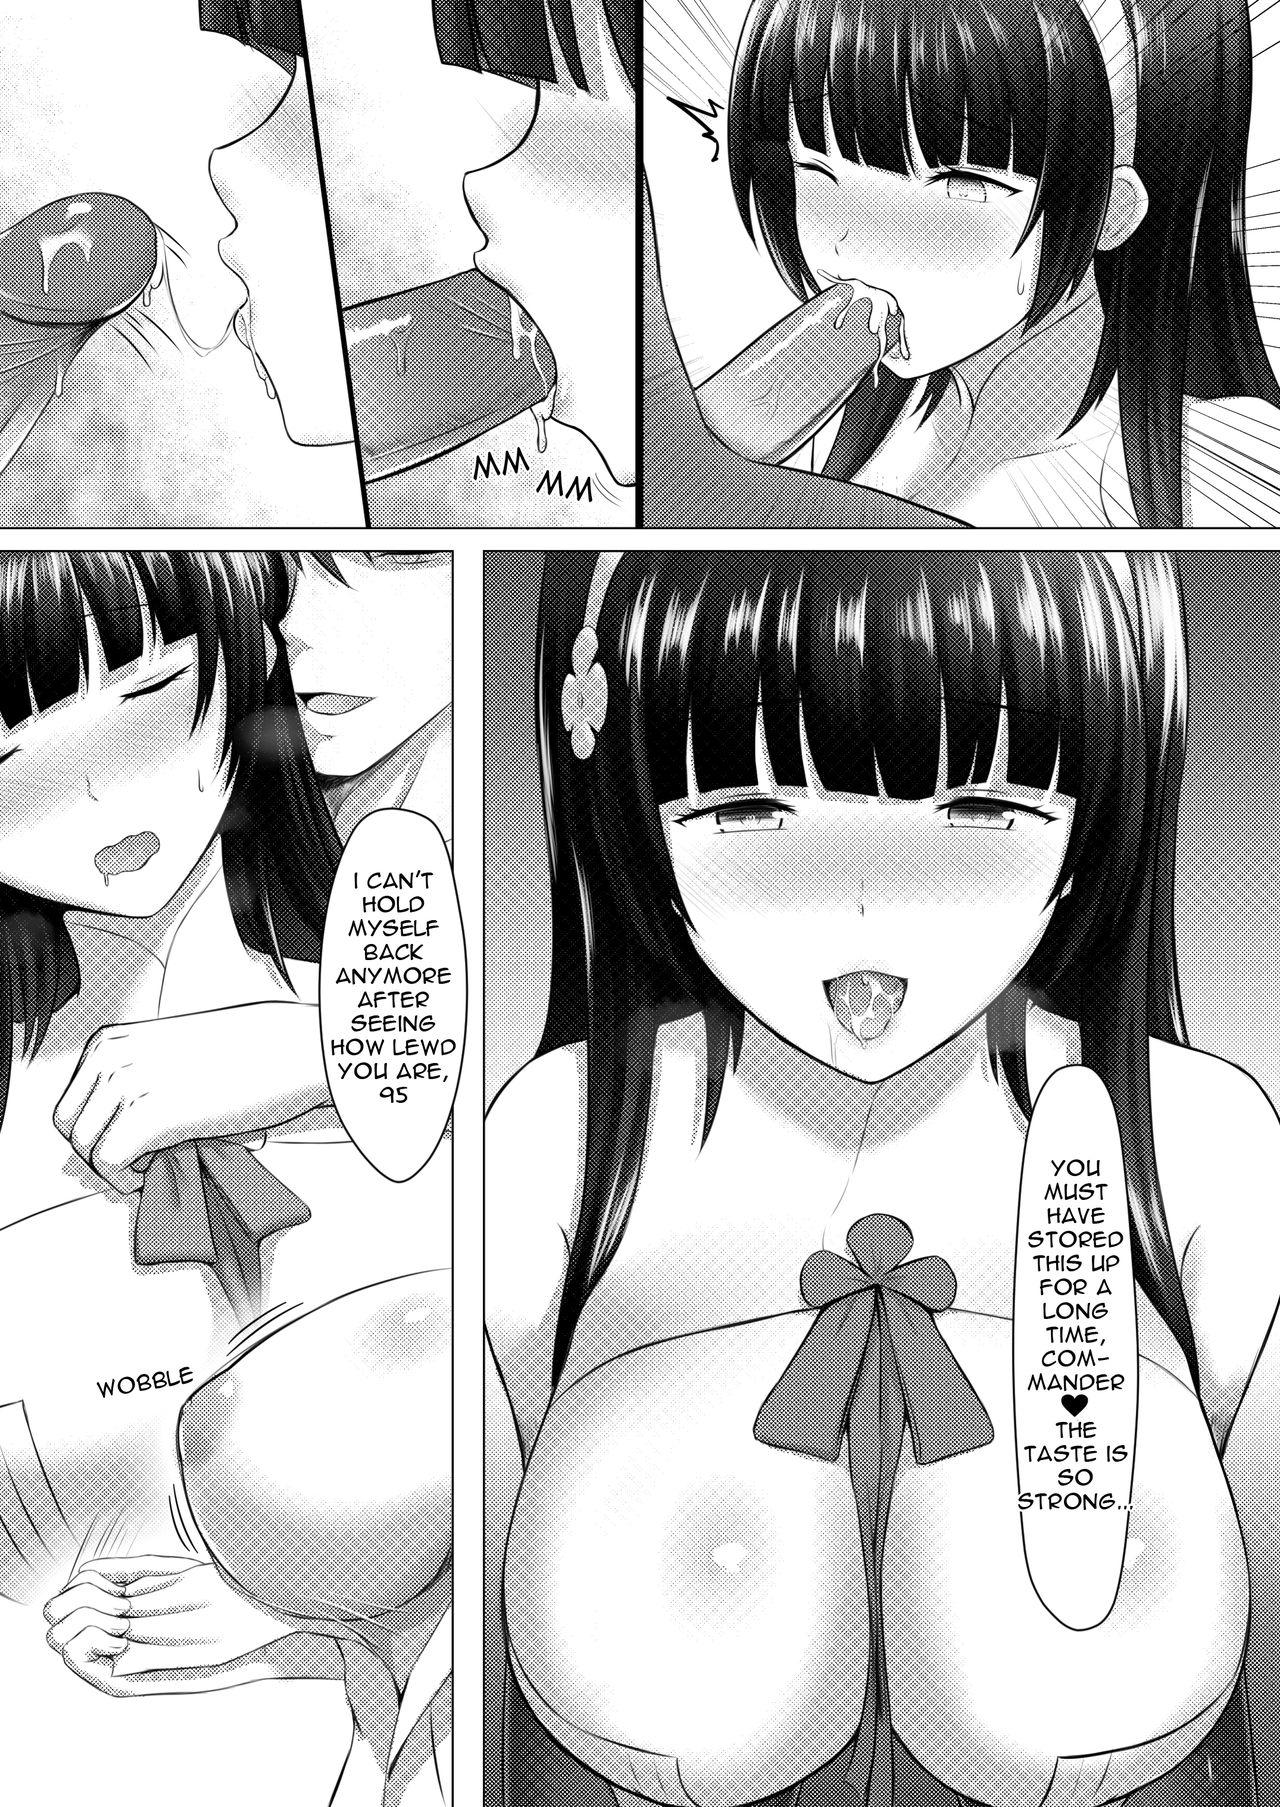 Chica A Lovely Flower's Gift - Girls frontline Hot Girl Pussy - Page 10